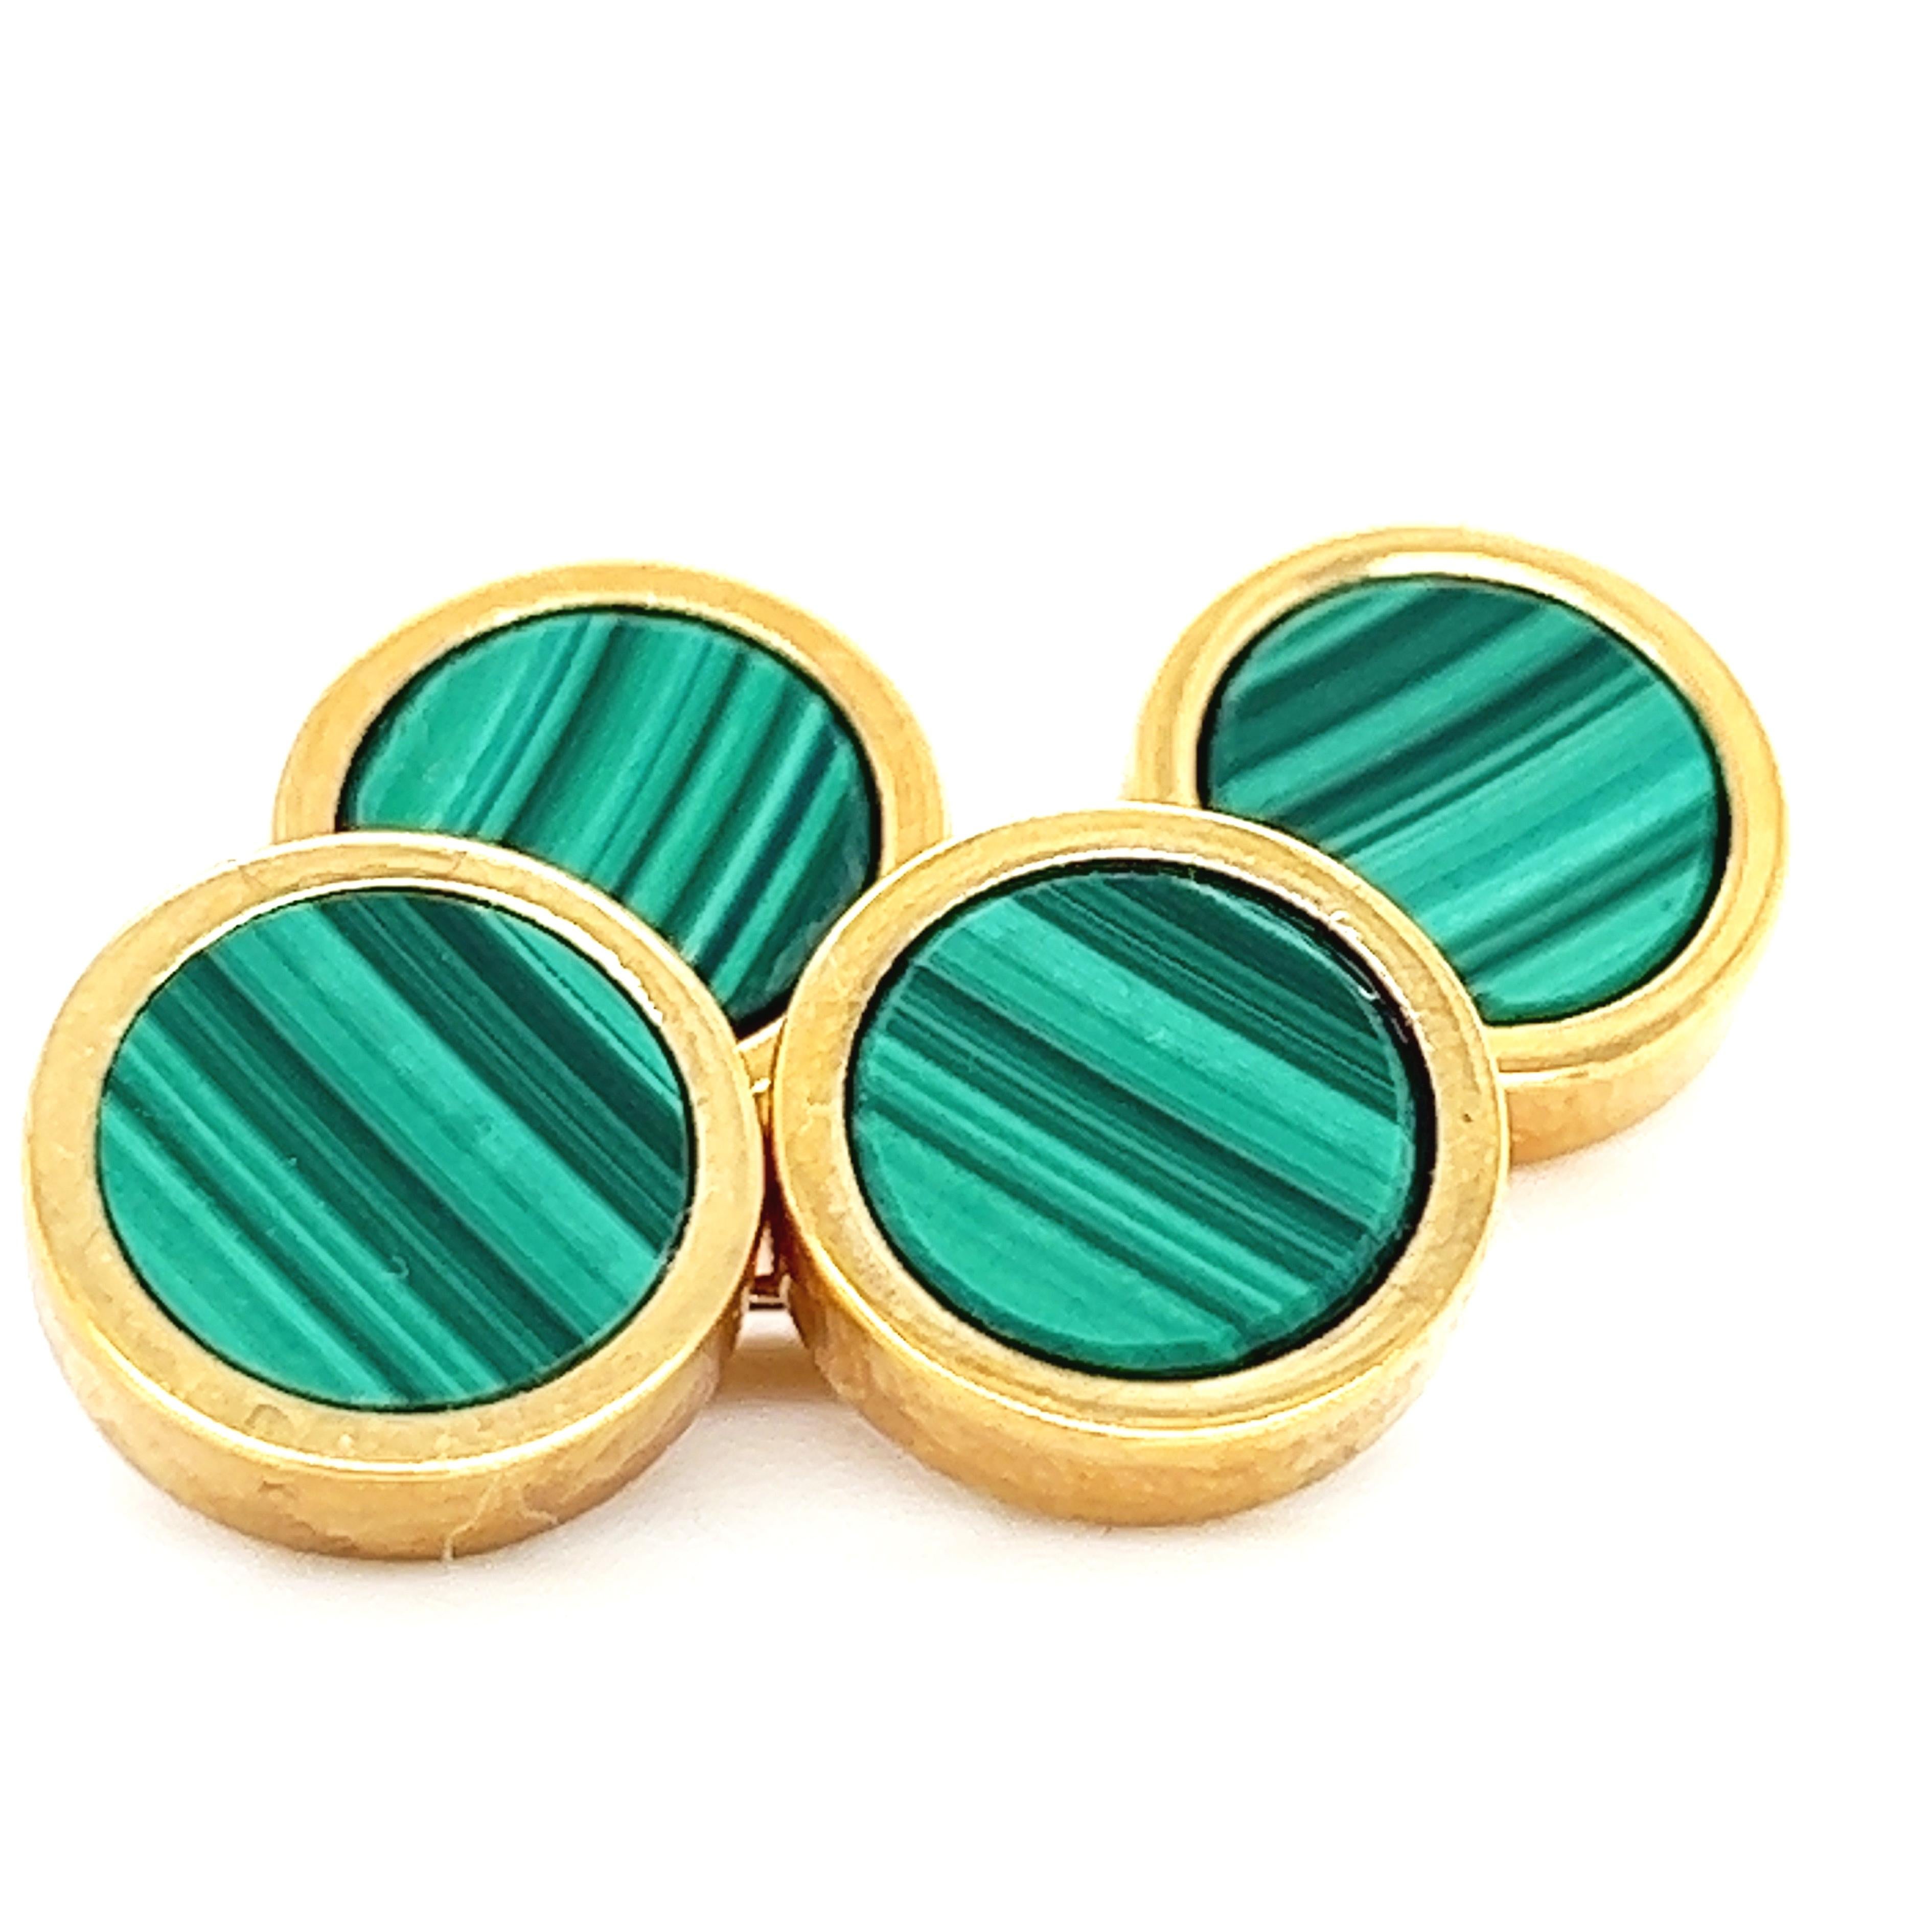 Chic and Timeless, Natural Hand Inlaid Natural Malachite Disk Round Shaped Yellow Gold Setting Cufflinks.
In our smart fitted Tobacco Suede Leather Case and Pouch.

